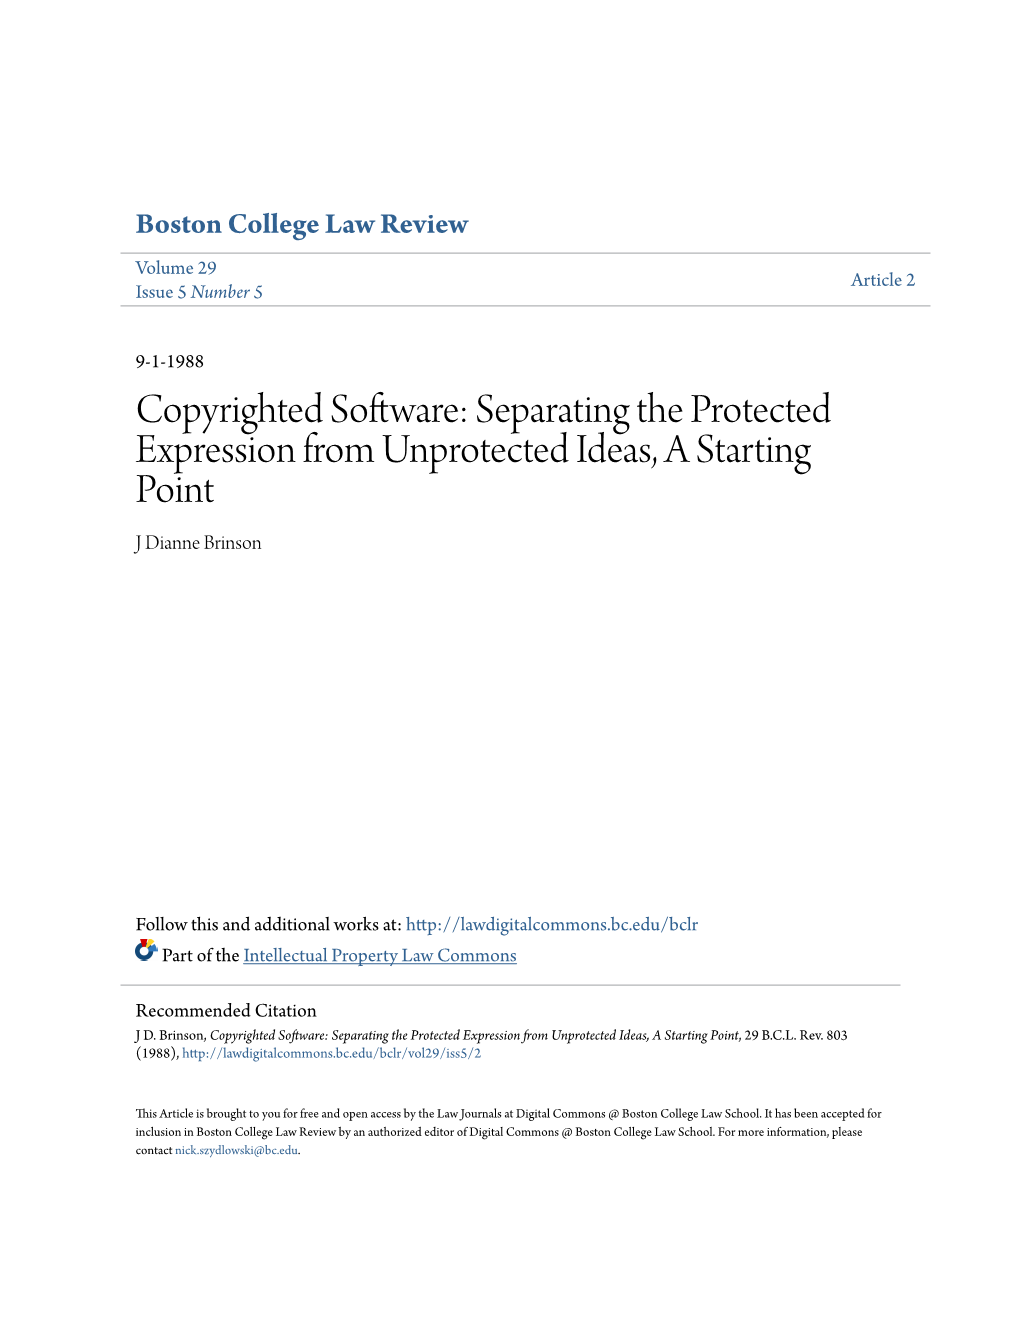 Copyrighted Software: Separating the Protected Expression from Unprotected Ideas, a Starting Point J Dianne Brinson